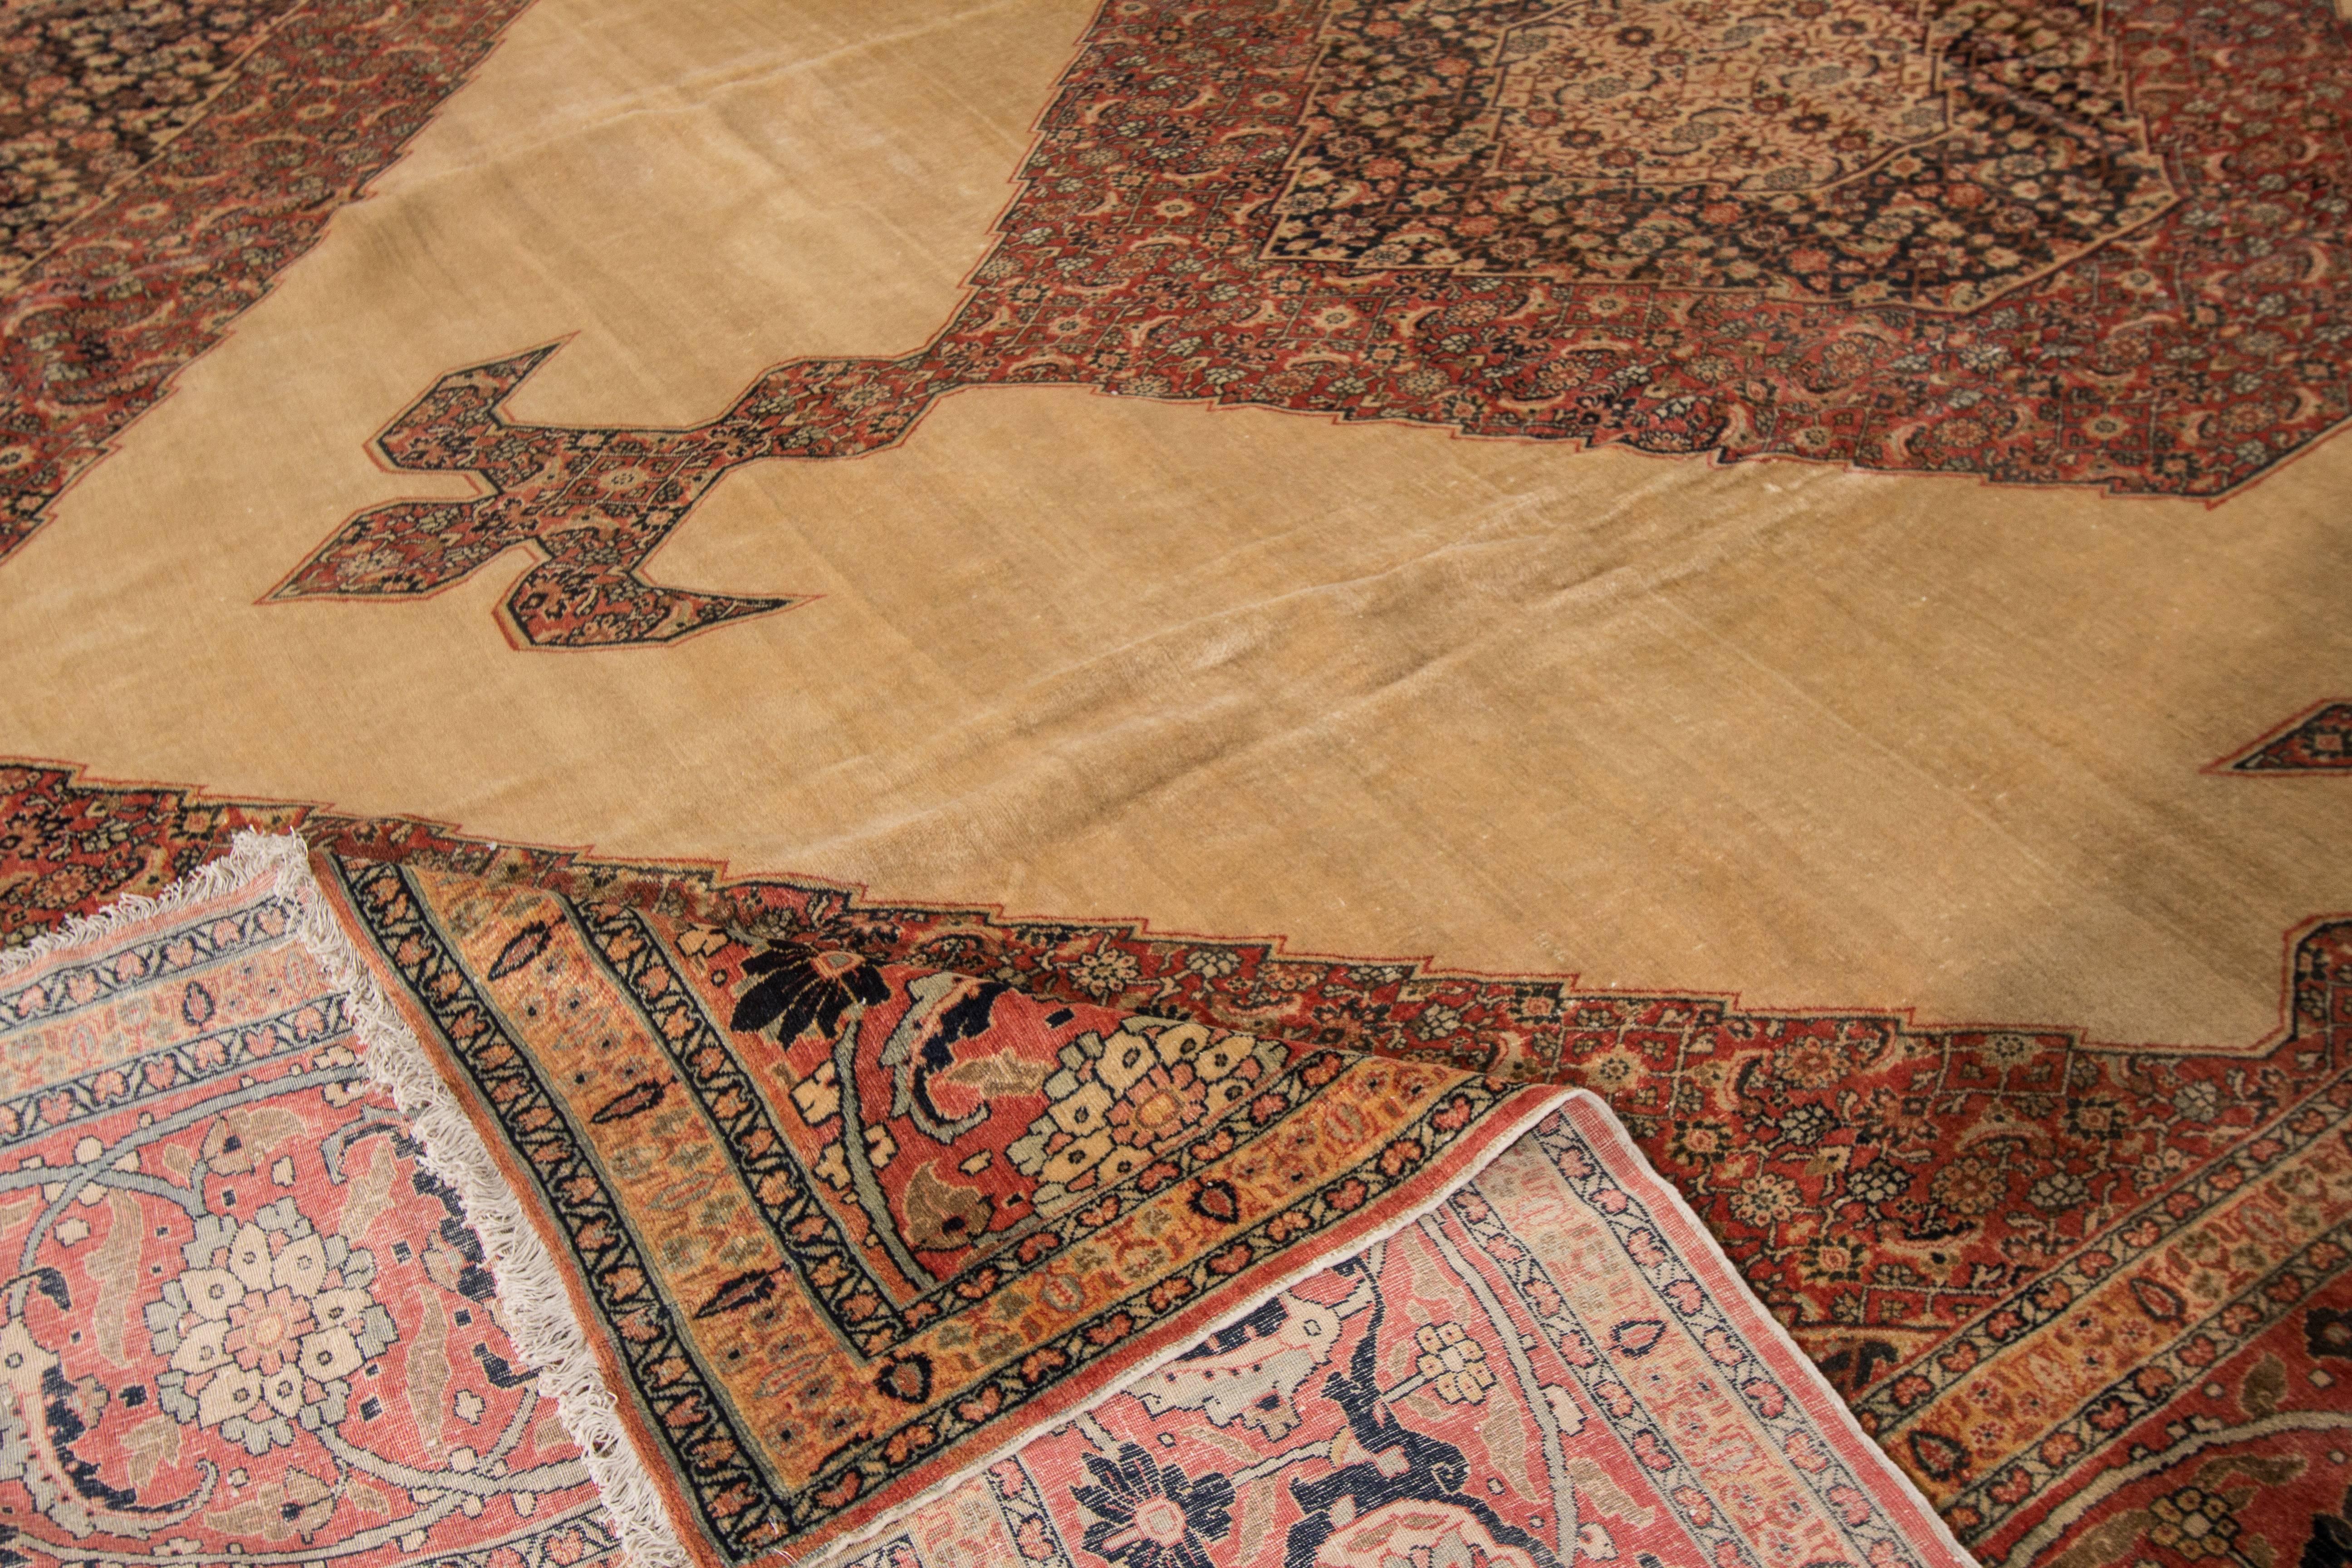 Measures: 11'.8 x 17'.1
This beautiful hand-knotted design rug will make your floor look splendid. This collection is made in wool.